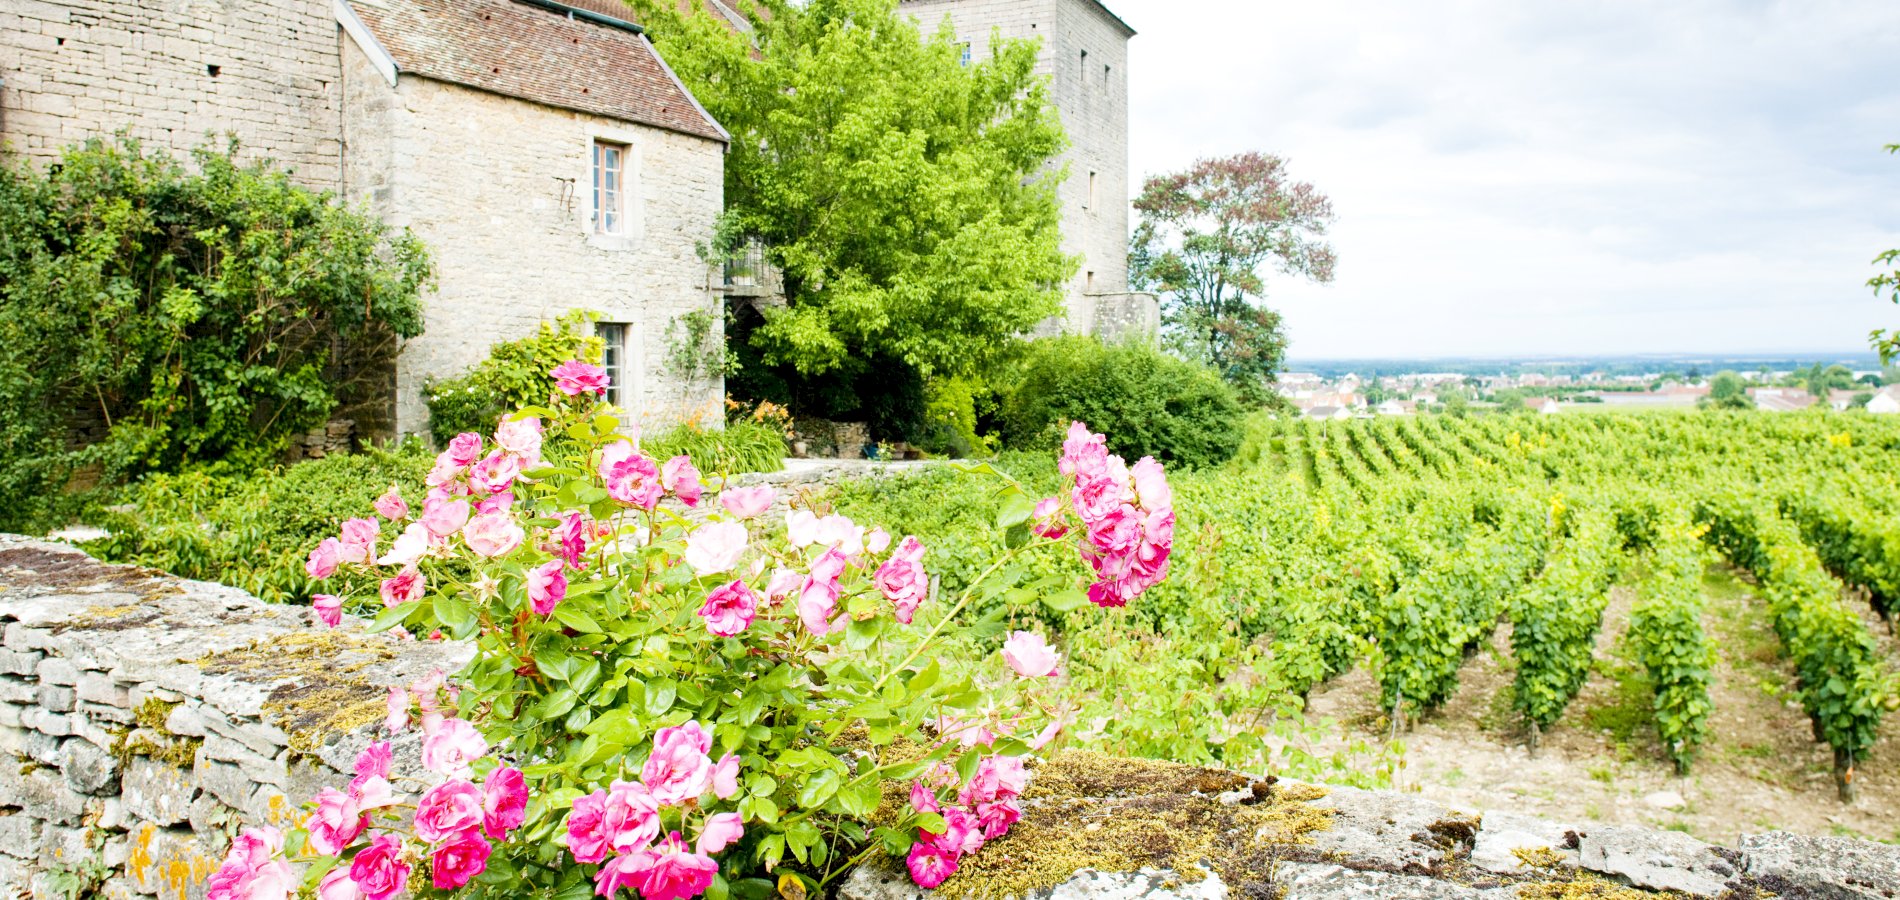 Ophorus Tours - A Private Burgundy Wine Tour Half Day Trip from Dijon to Côte de Nuits 